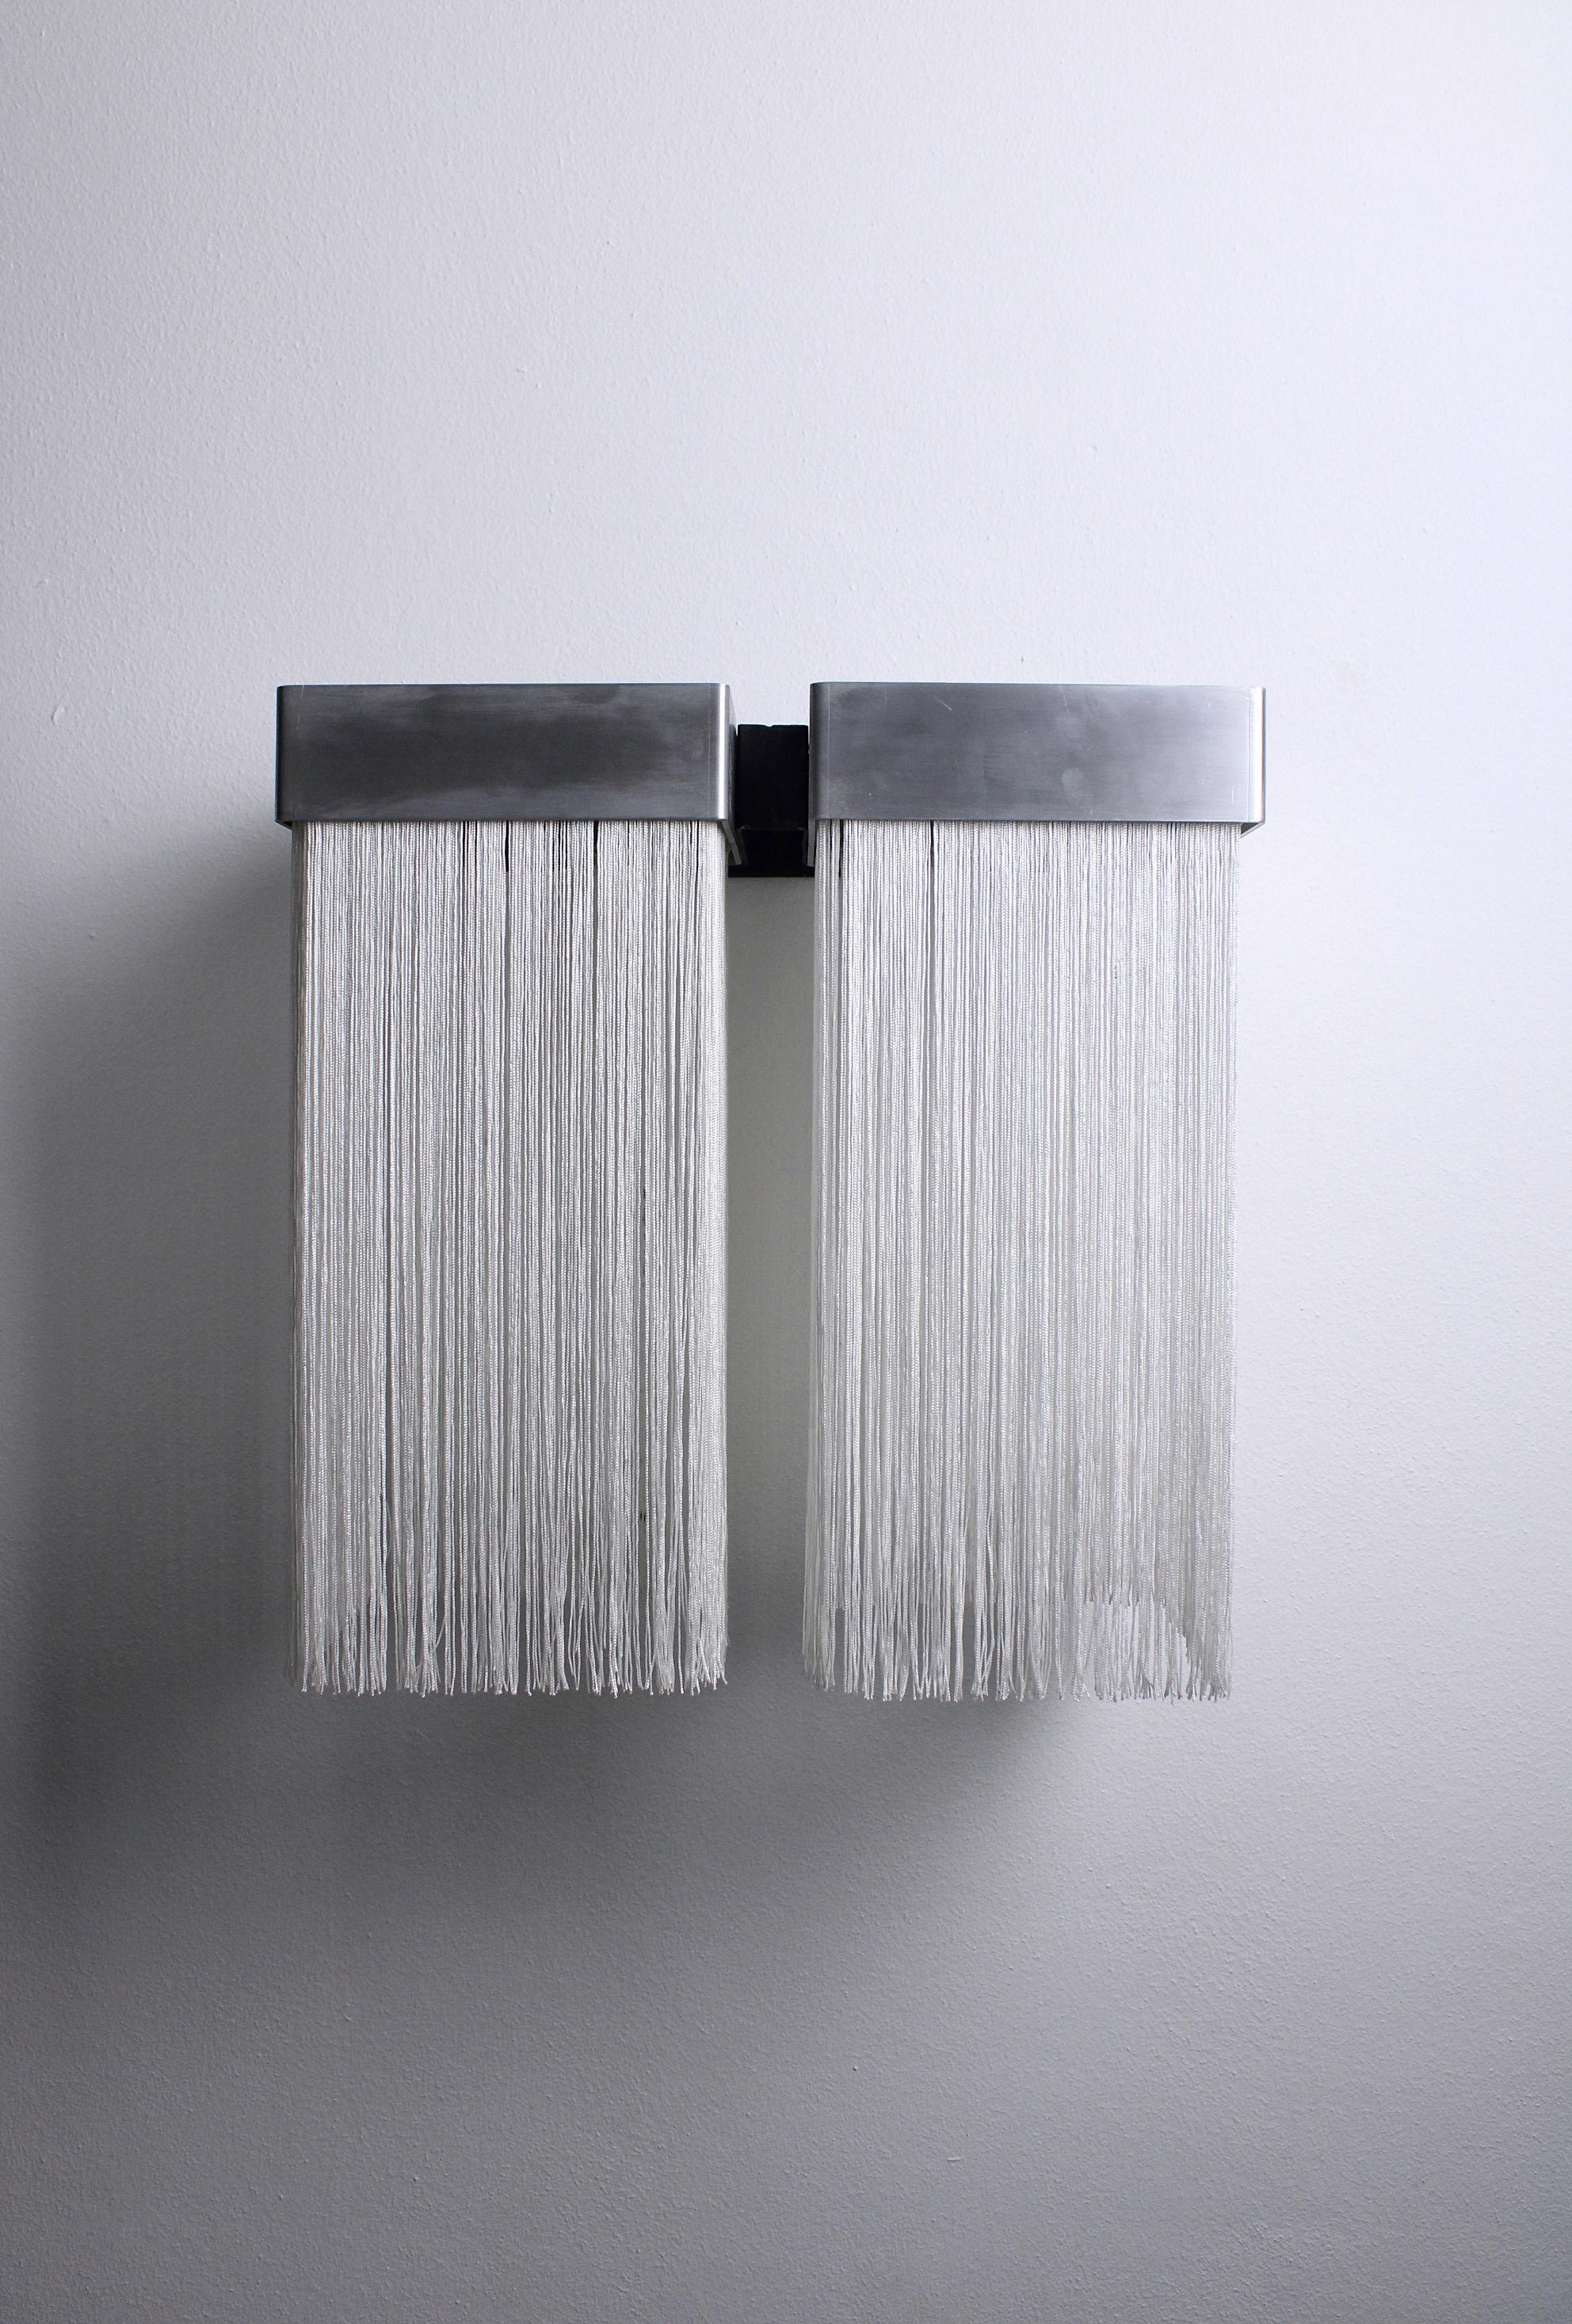 Model 259/2 wall lamps by Massimo Vignelli for Arteluce, 1964 For Sale 4